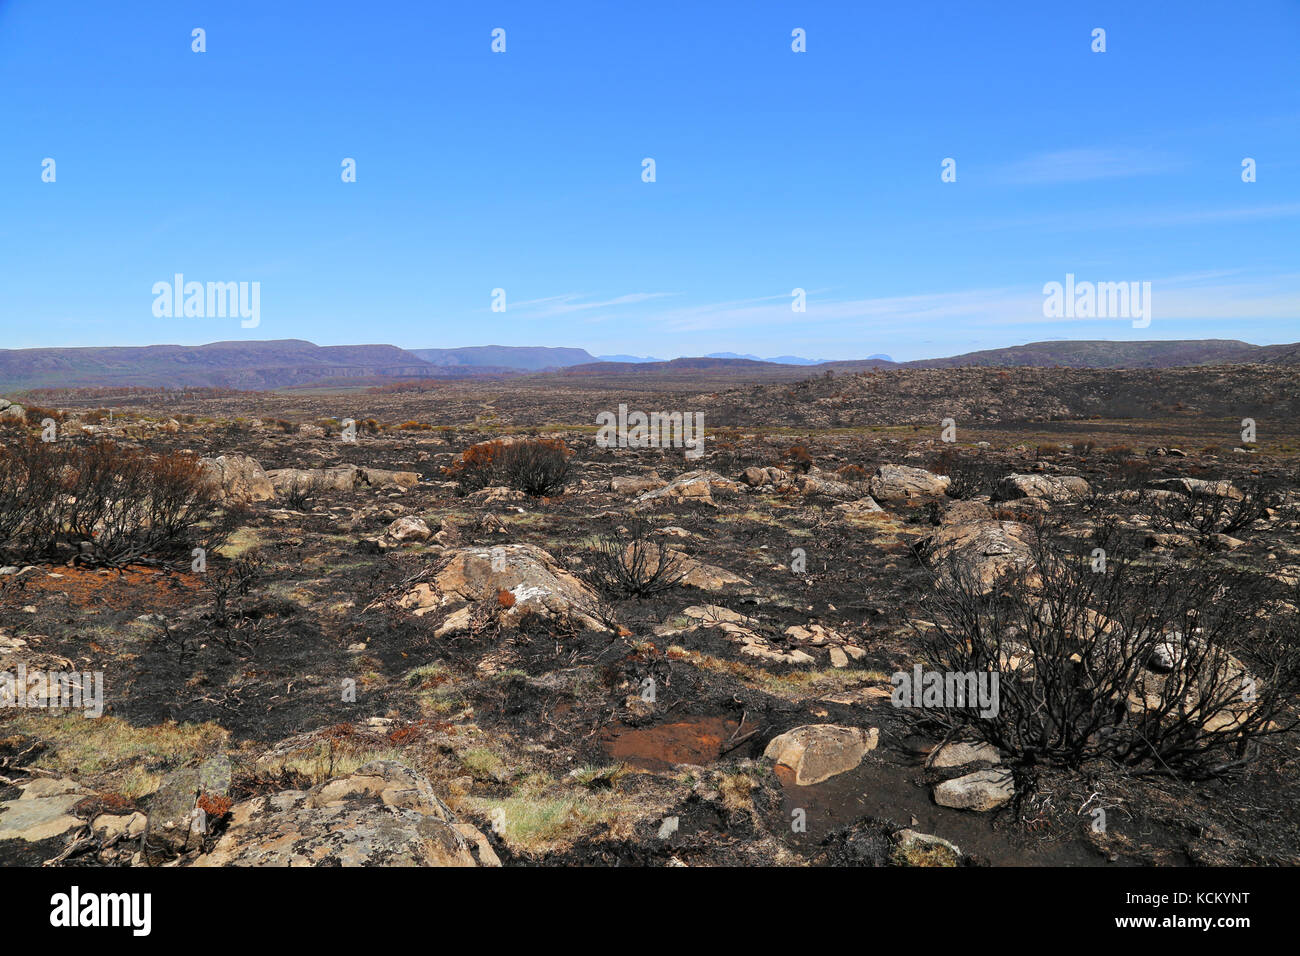 Extensive damage to the slopes of the Central Plateau from catastrophic bushfires. Great Western Tiers, northern Tasmania, Australia Stock Photo